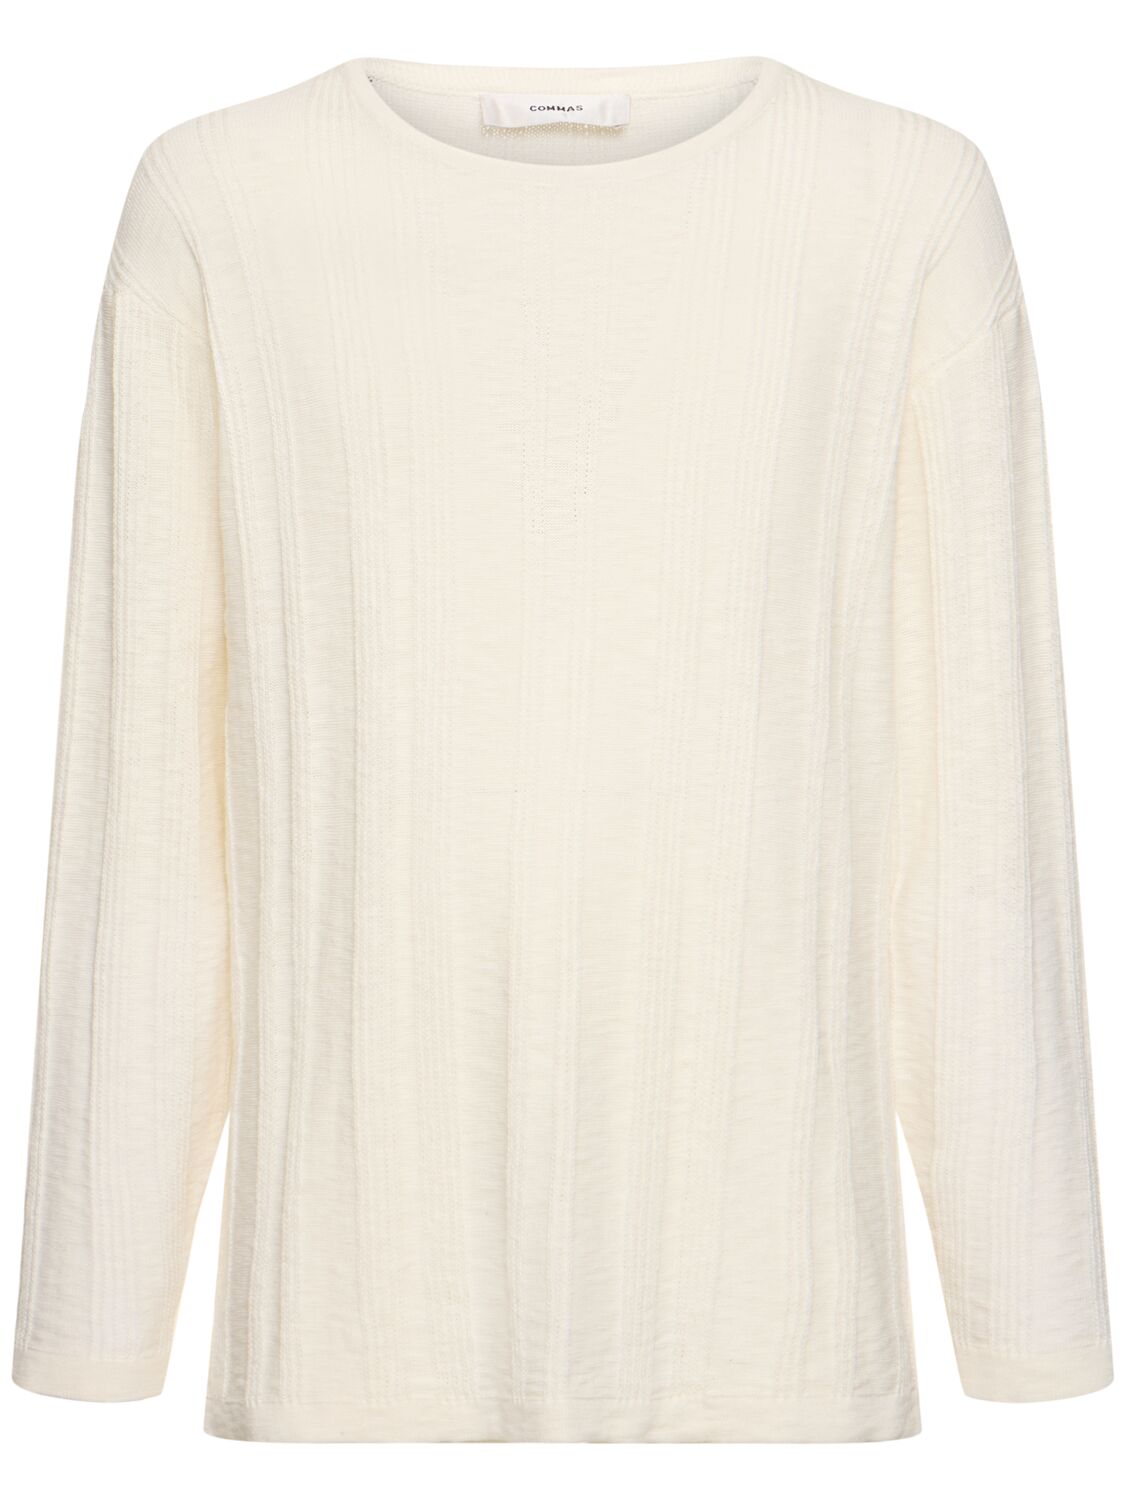 Commas Cotton Blend Sweater In White